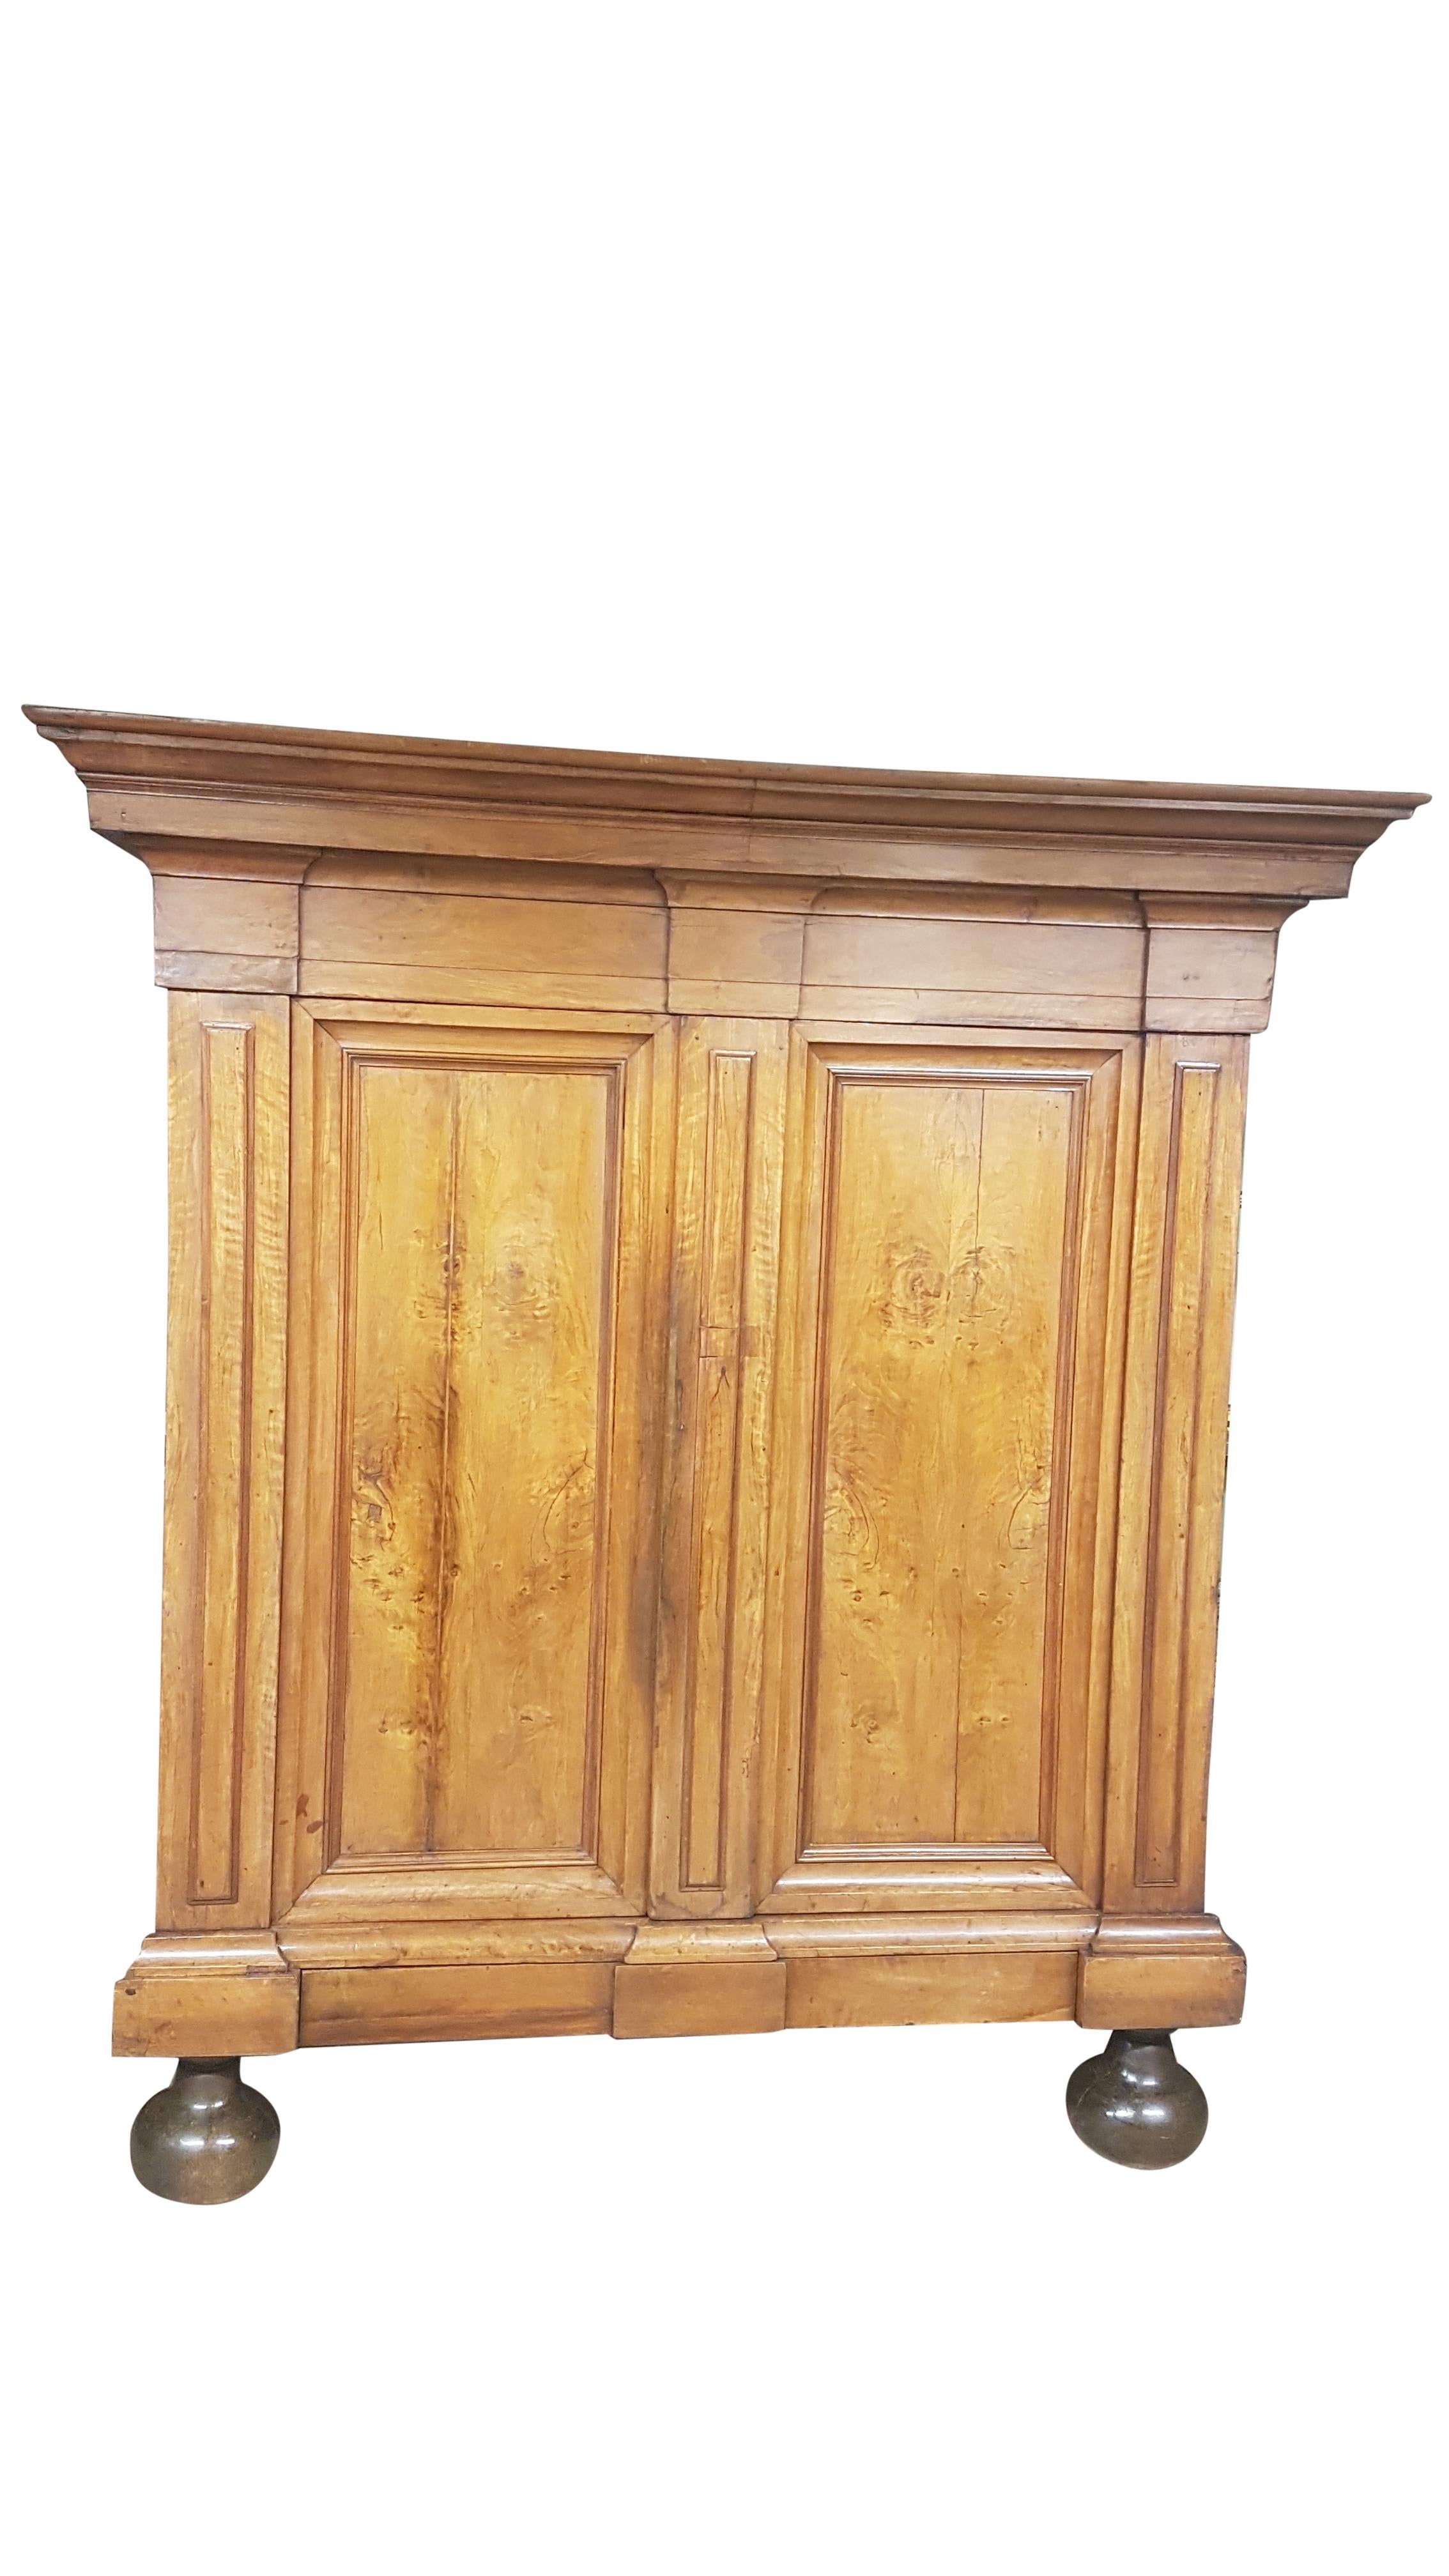 19th Century German Baroque Style Walnut Armoire In Distressed Condition For Sale In Bodicote, Oxfordshire